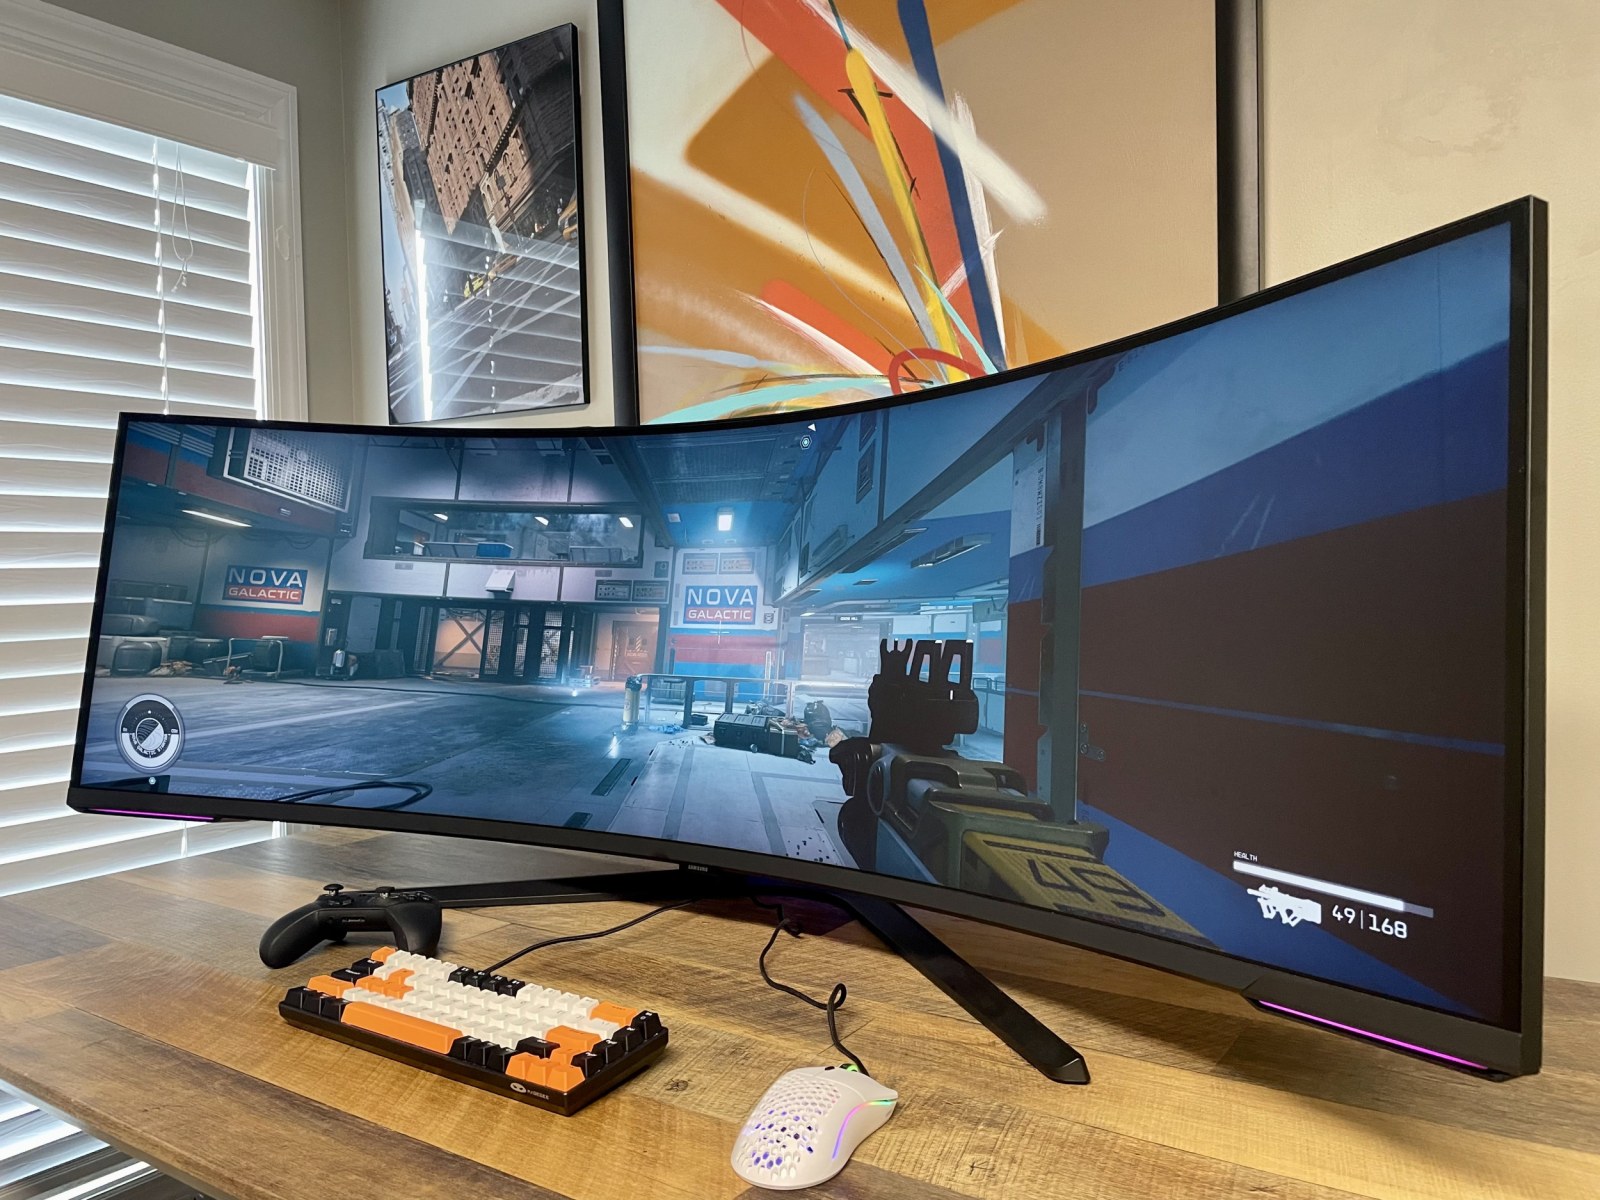 Samsung Odyssey Neo G9 57-inch Review: An Absolutely Impressive